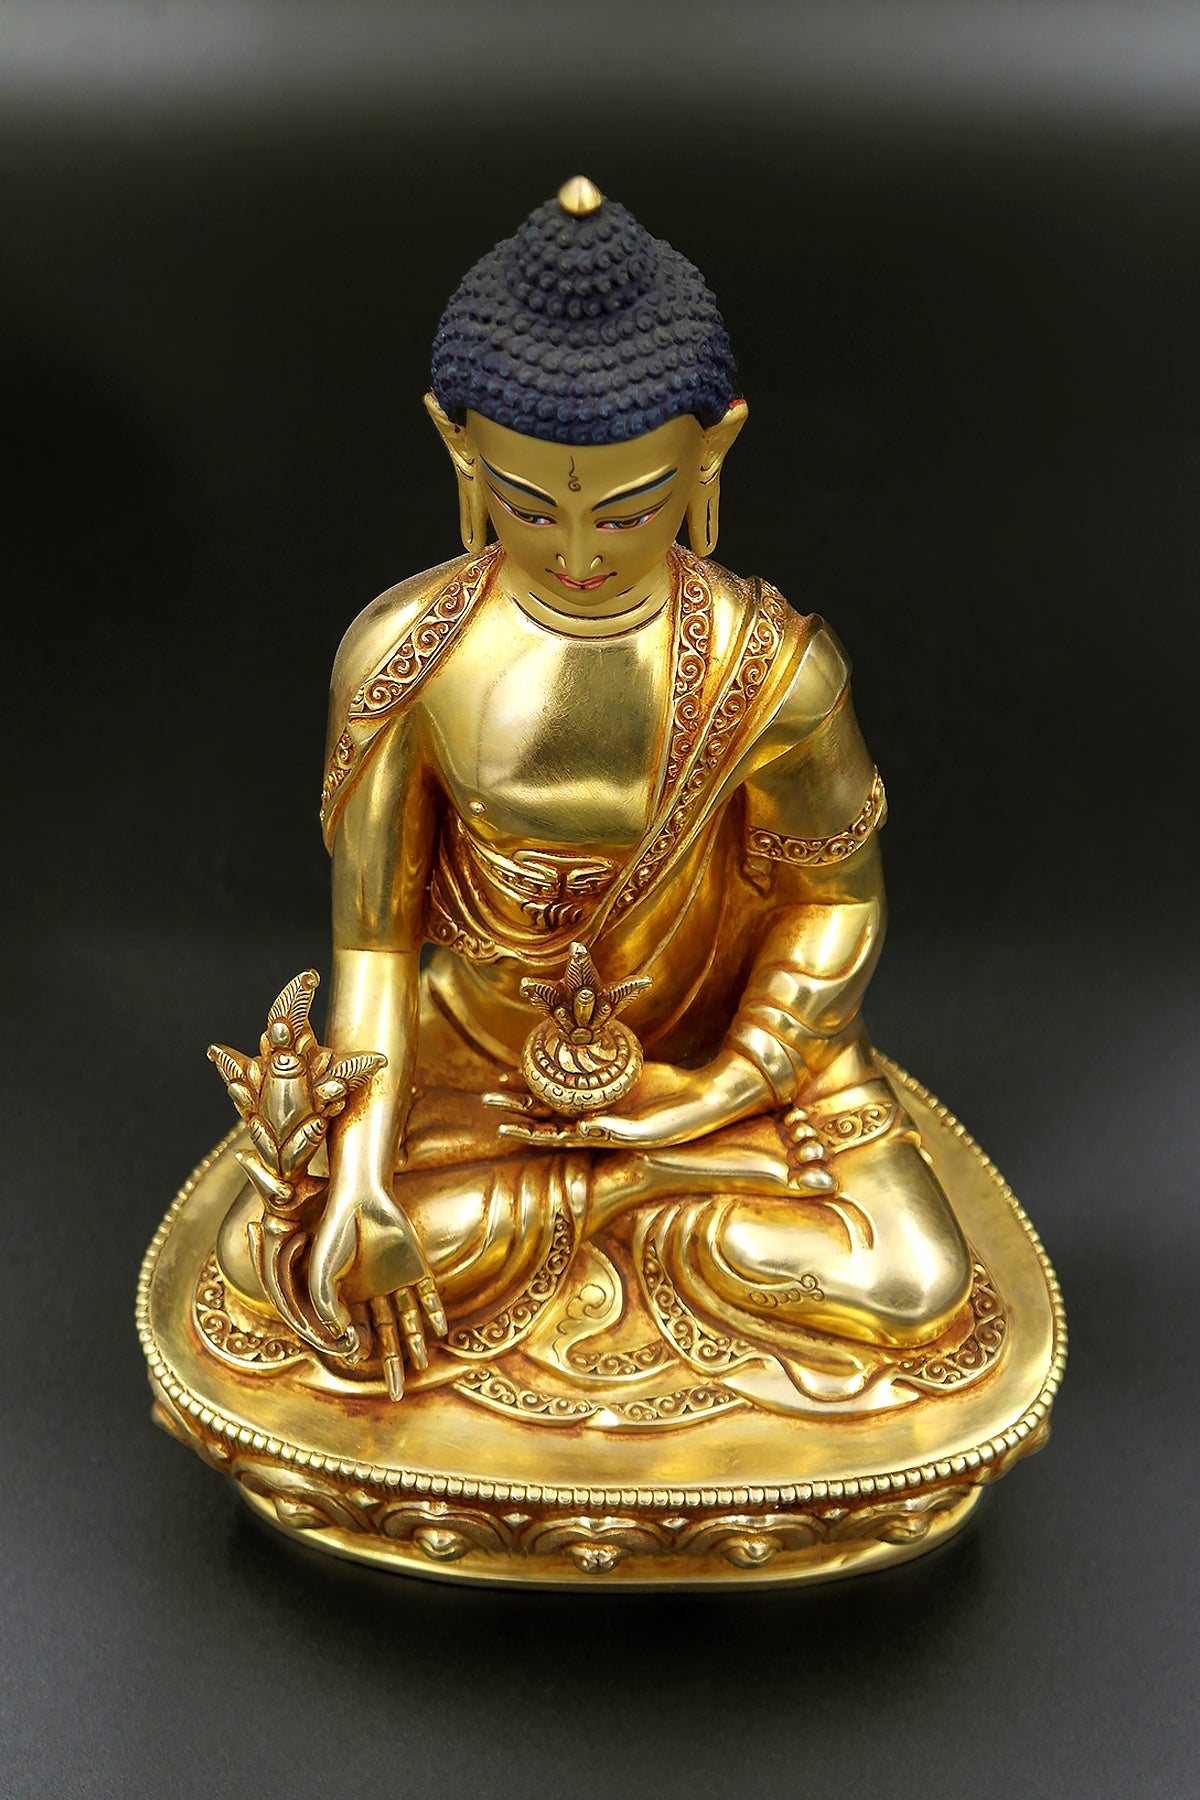 Fully plated Golden Medicine Buddha Statue from Nepal 9"